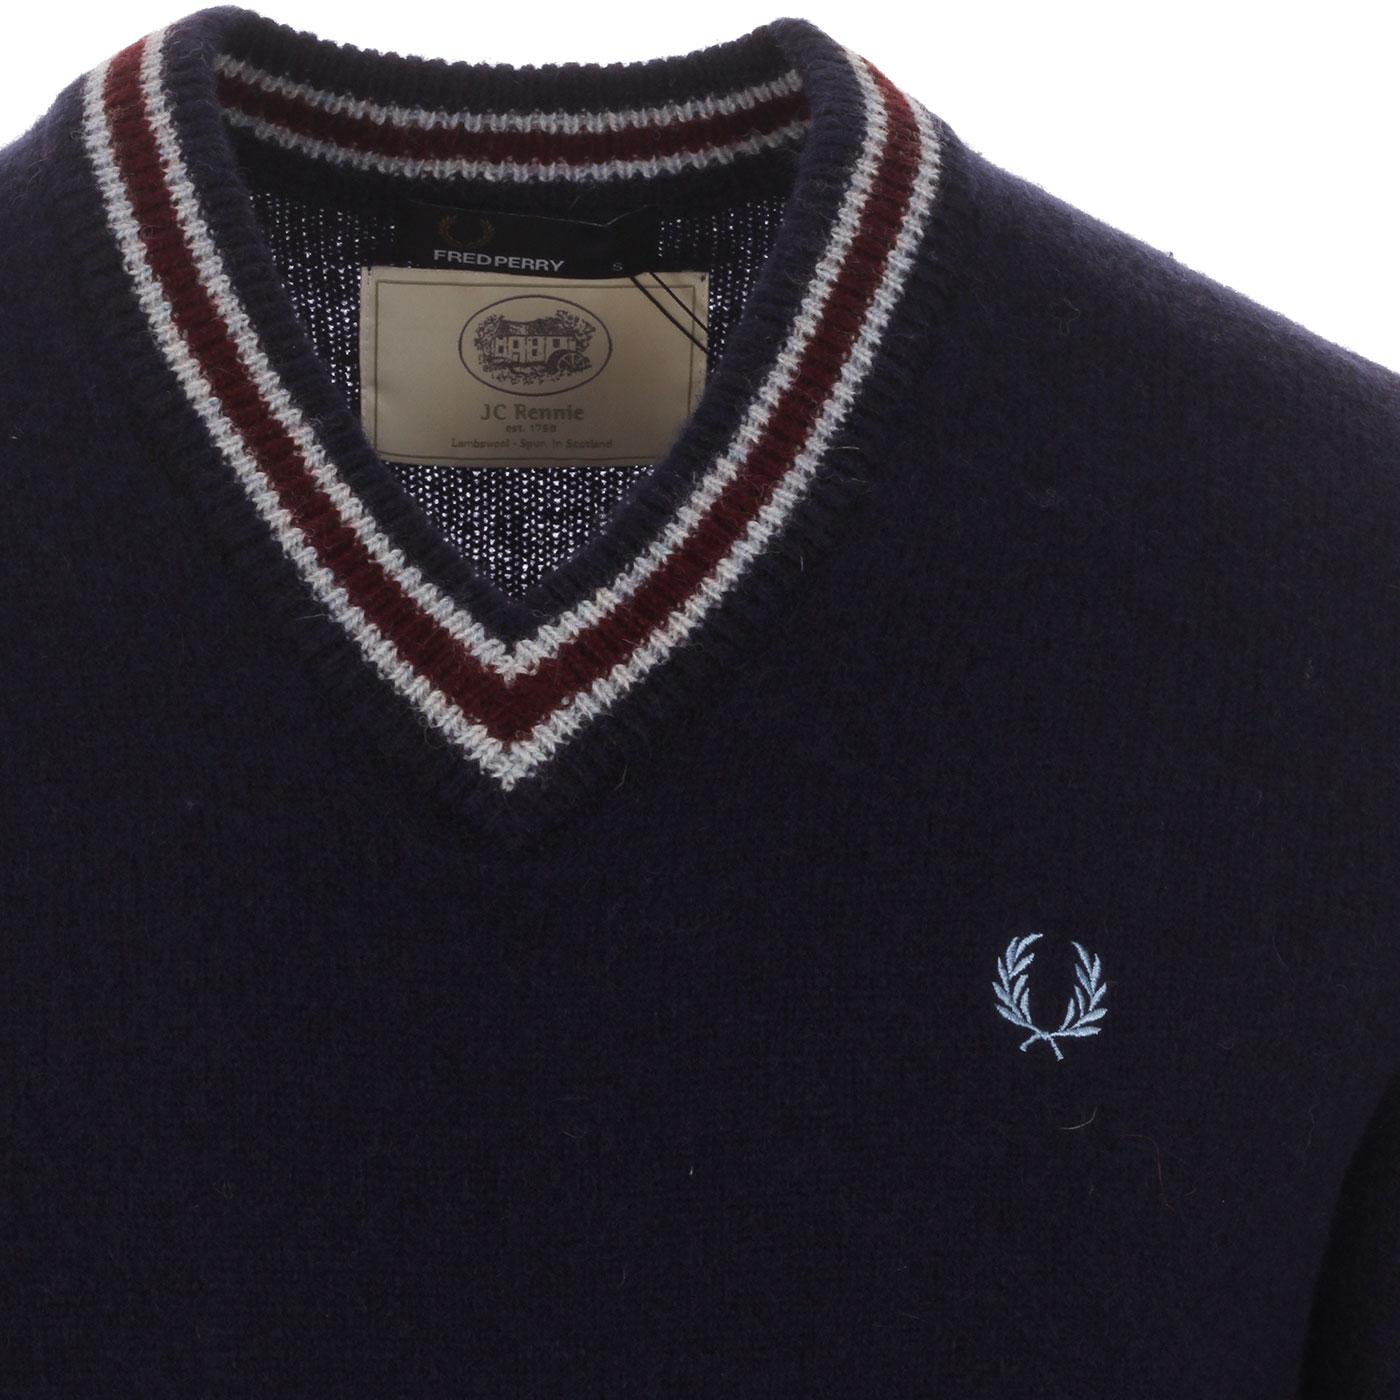 FRED PERRY Retro Spun Lambswool V-Neck Jumper in Blue